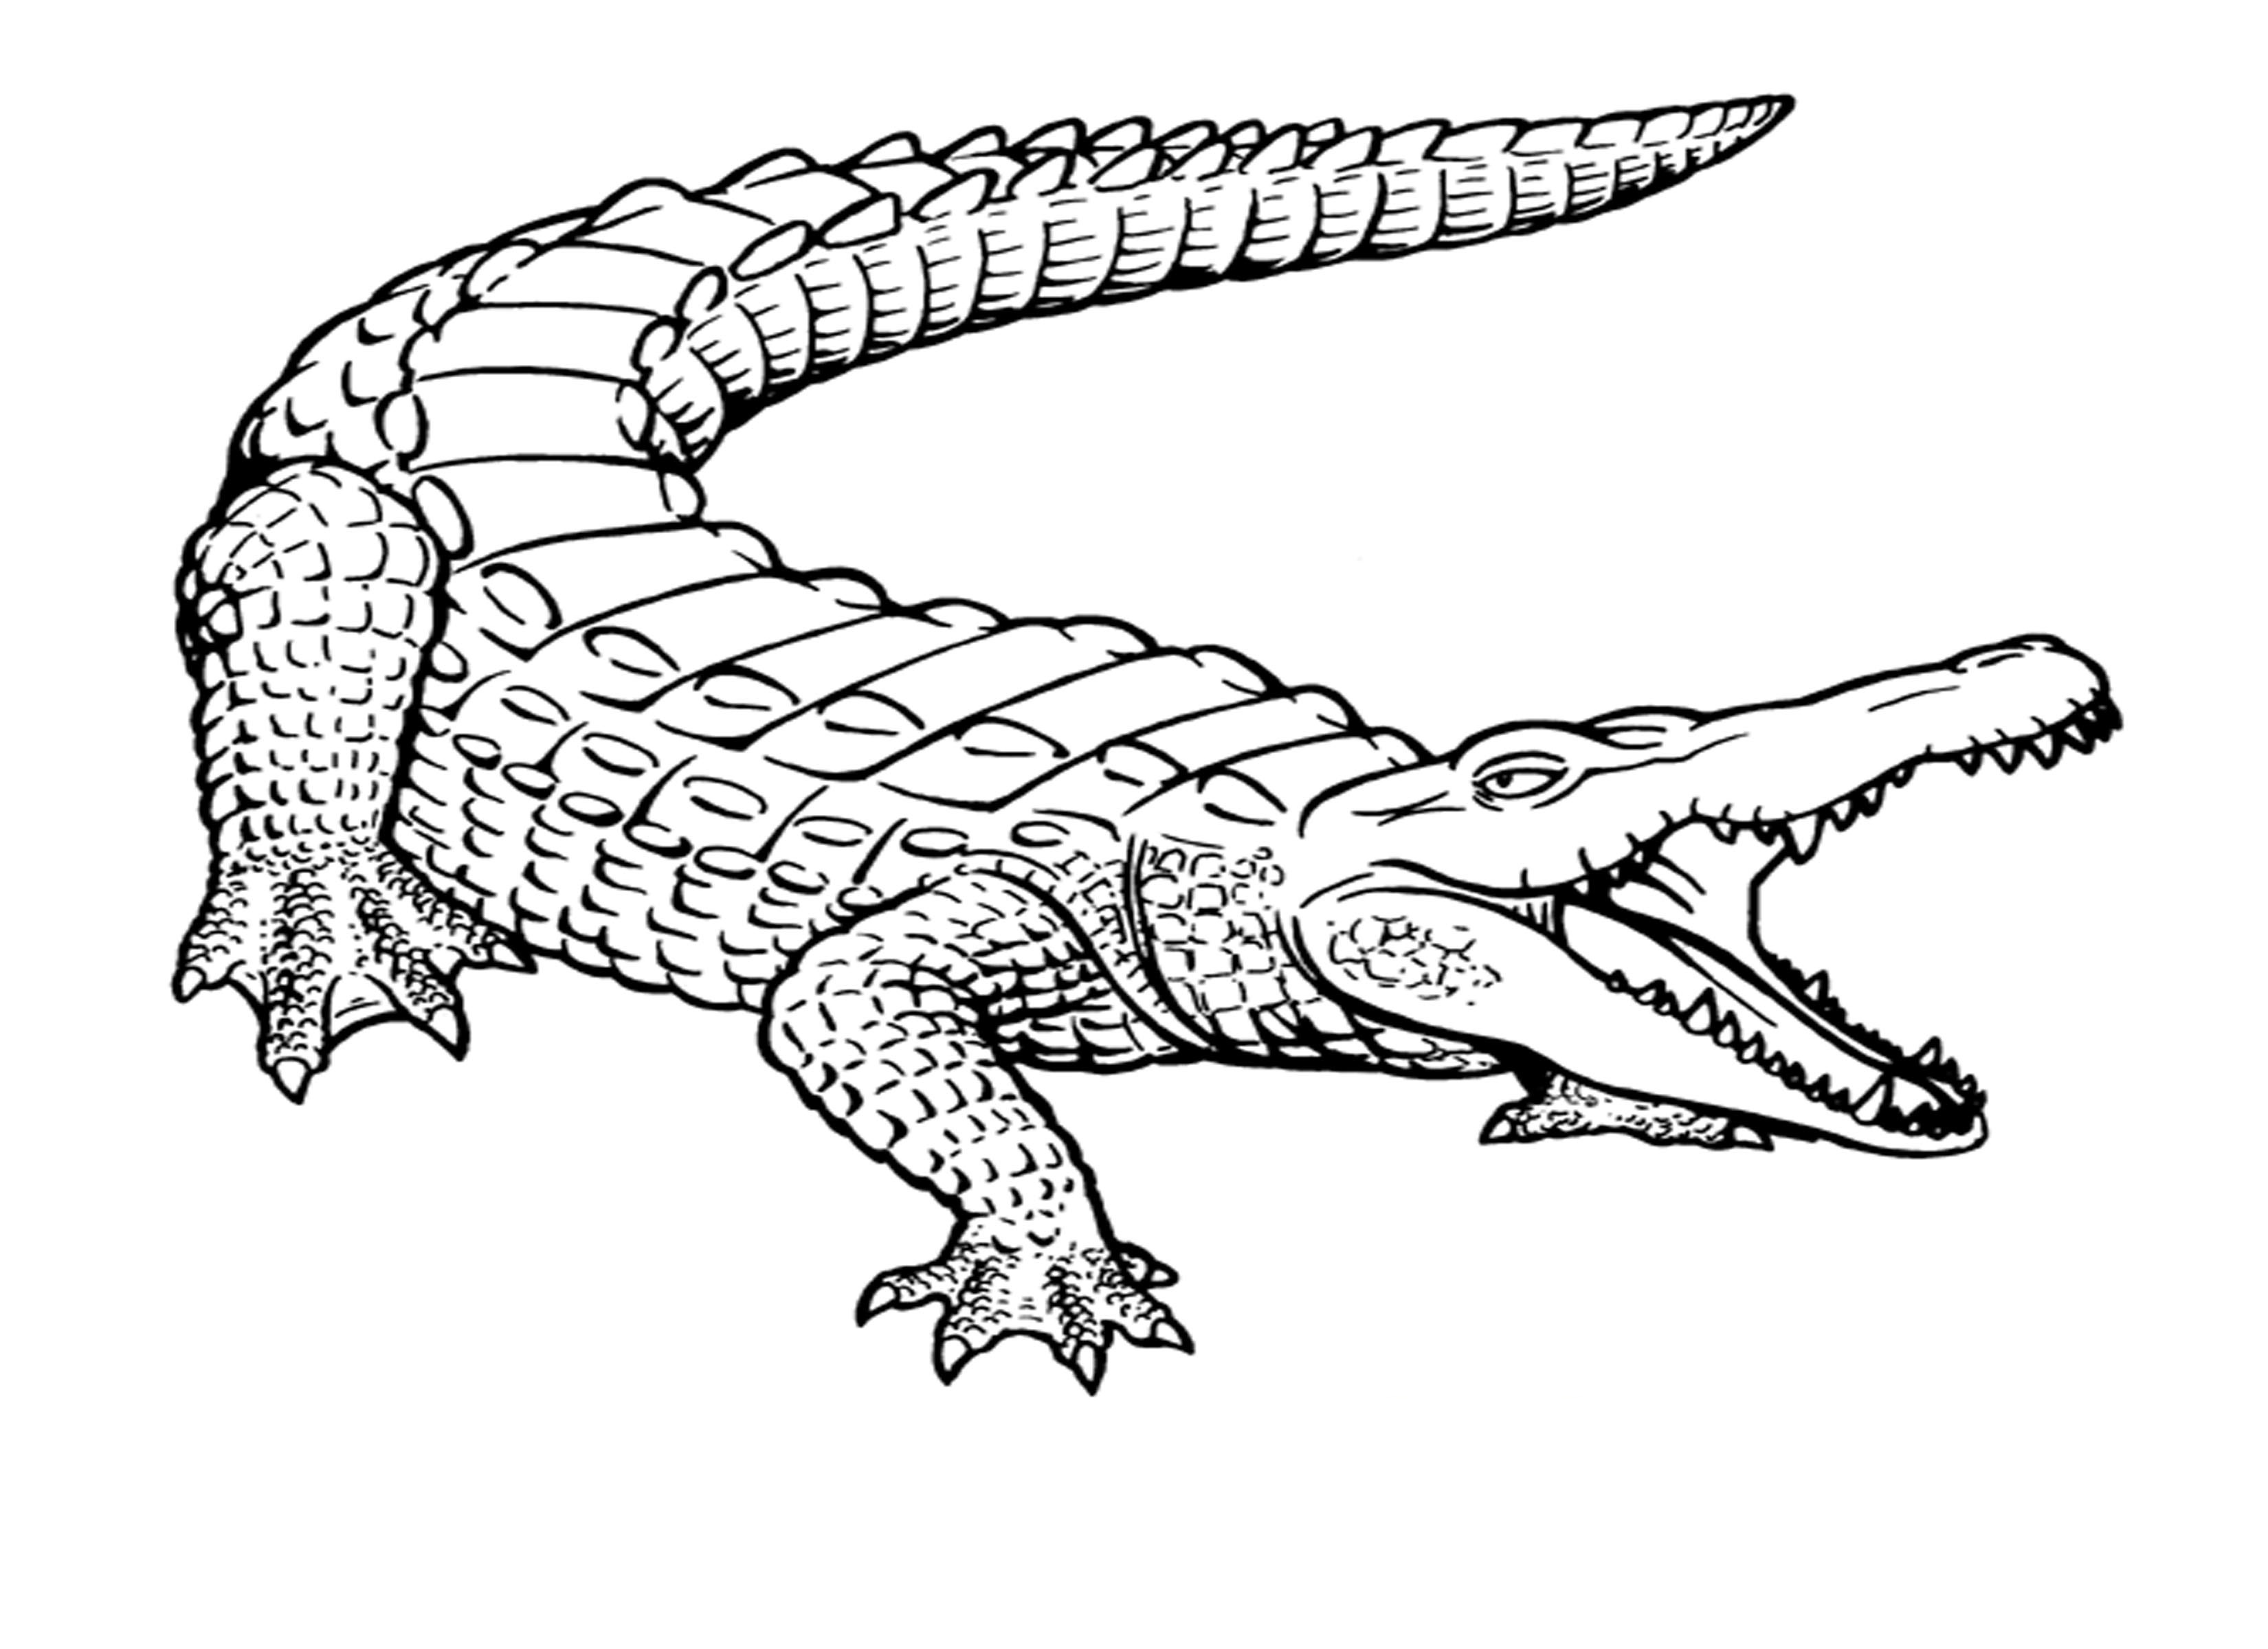 Crocodile Drawings For Kids Coloring Page